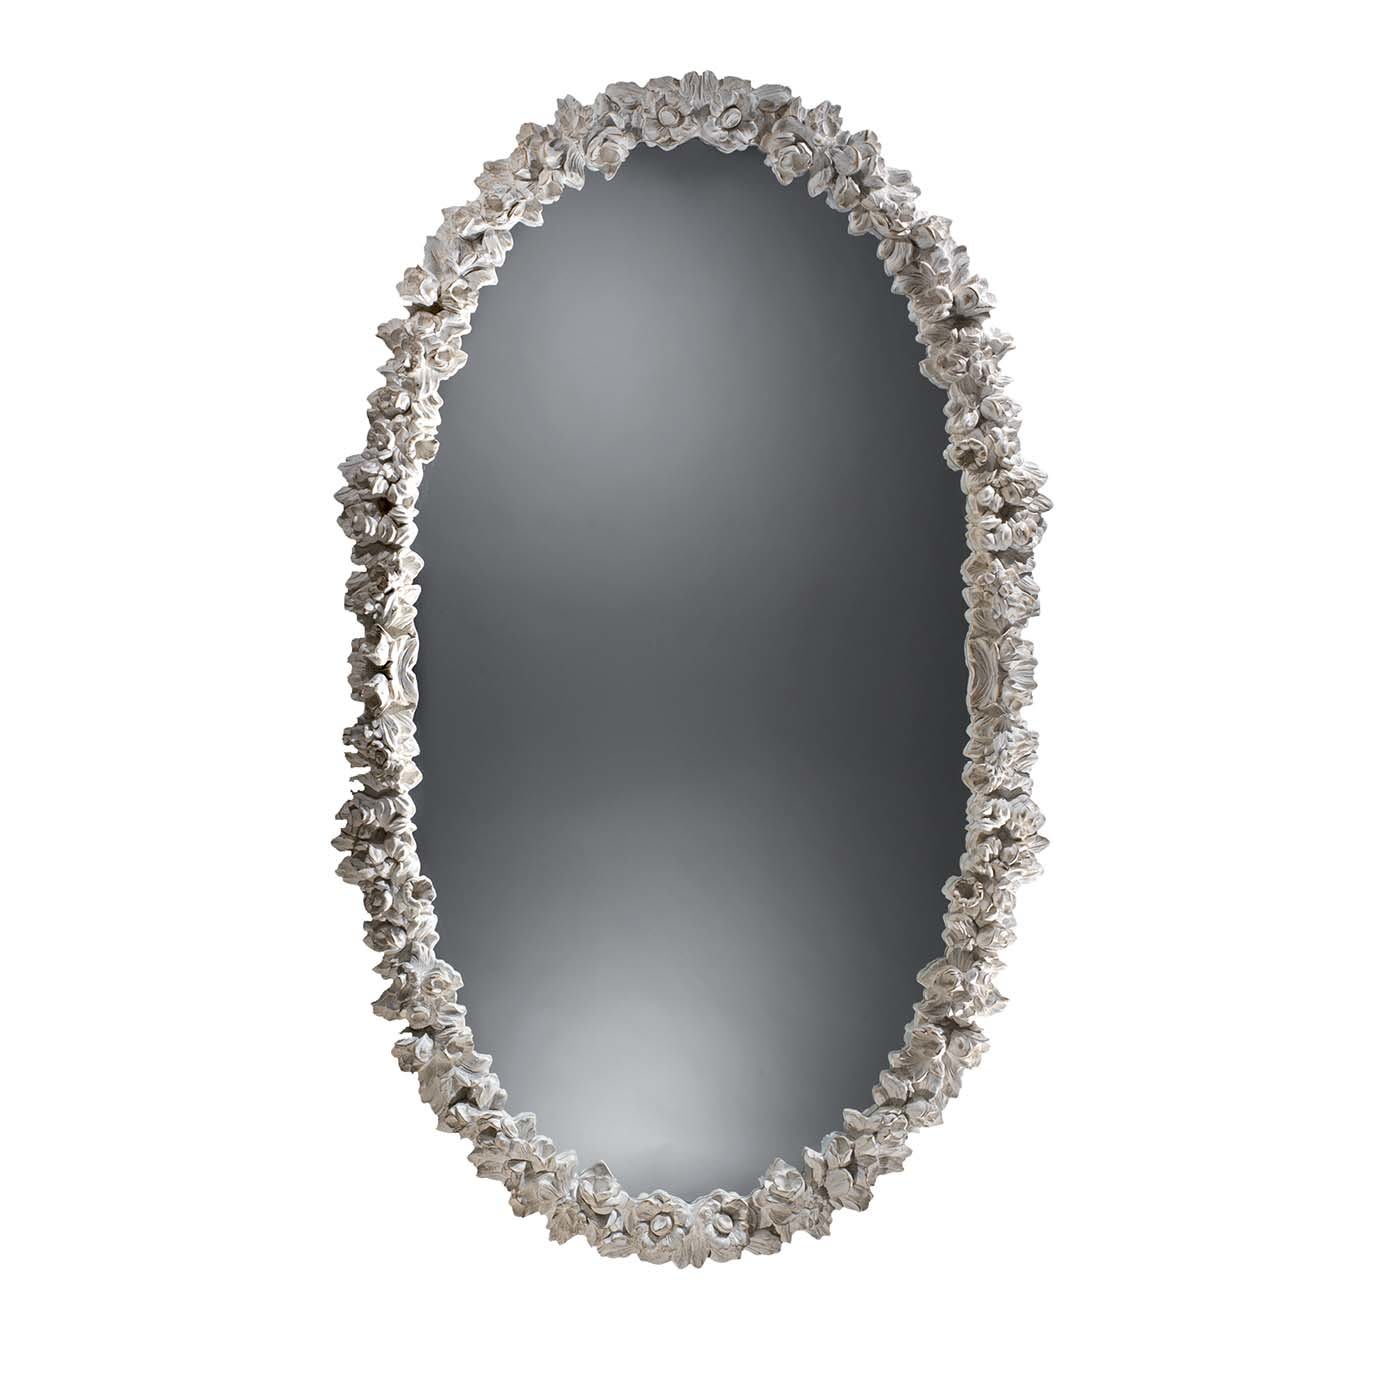 Antique White Oval Wall Mirror - Spini Firenze